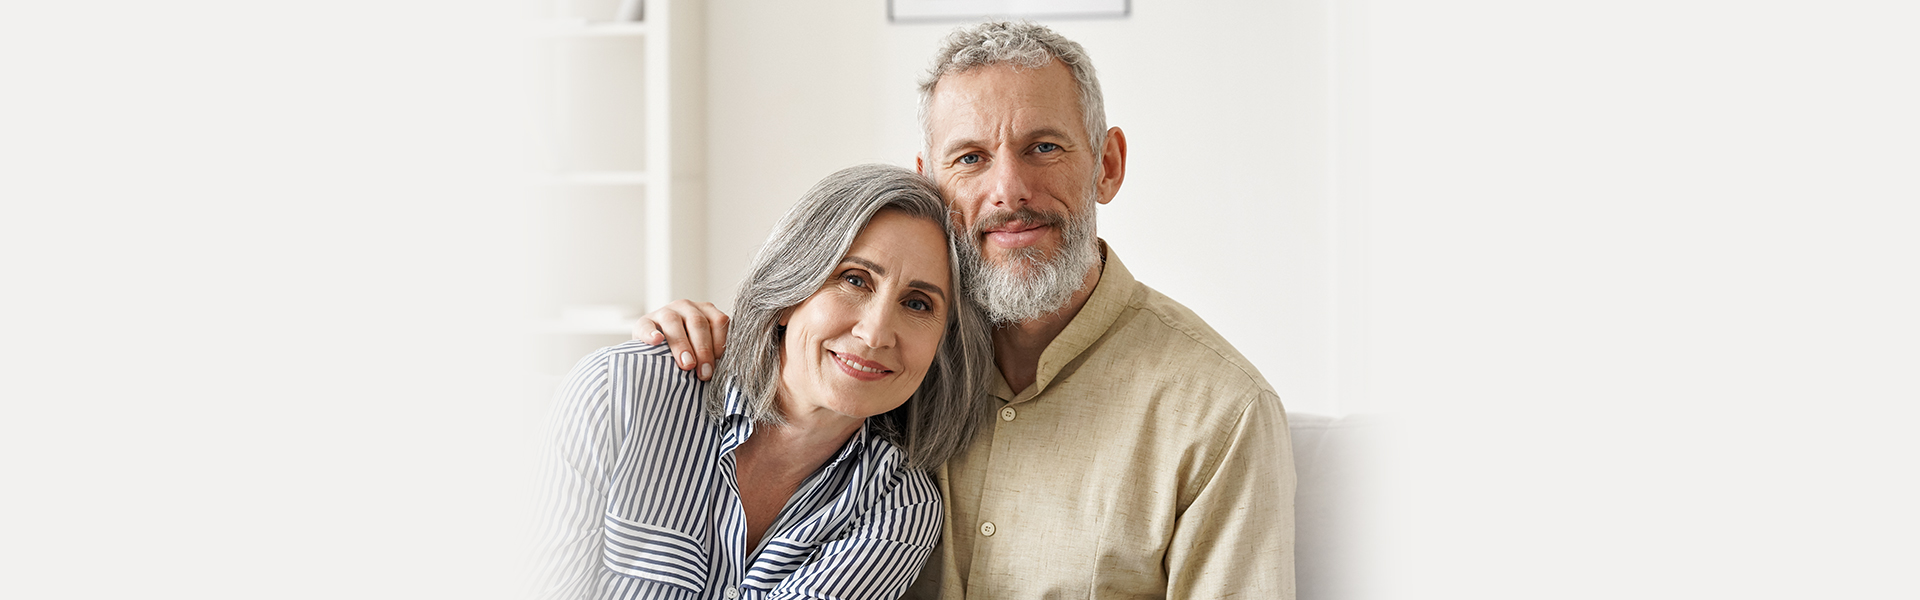 Gentle Root Canals: Modern Techniques for Seniors at FaktorDMD – Manalapan, NJ